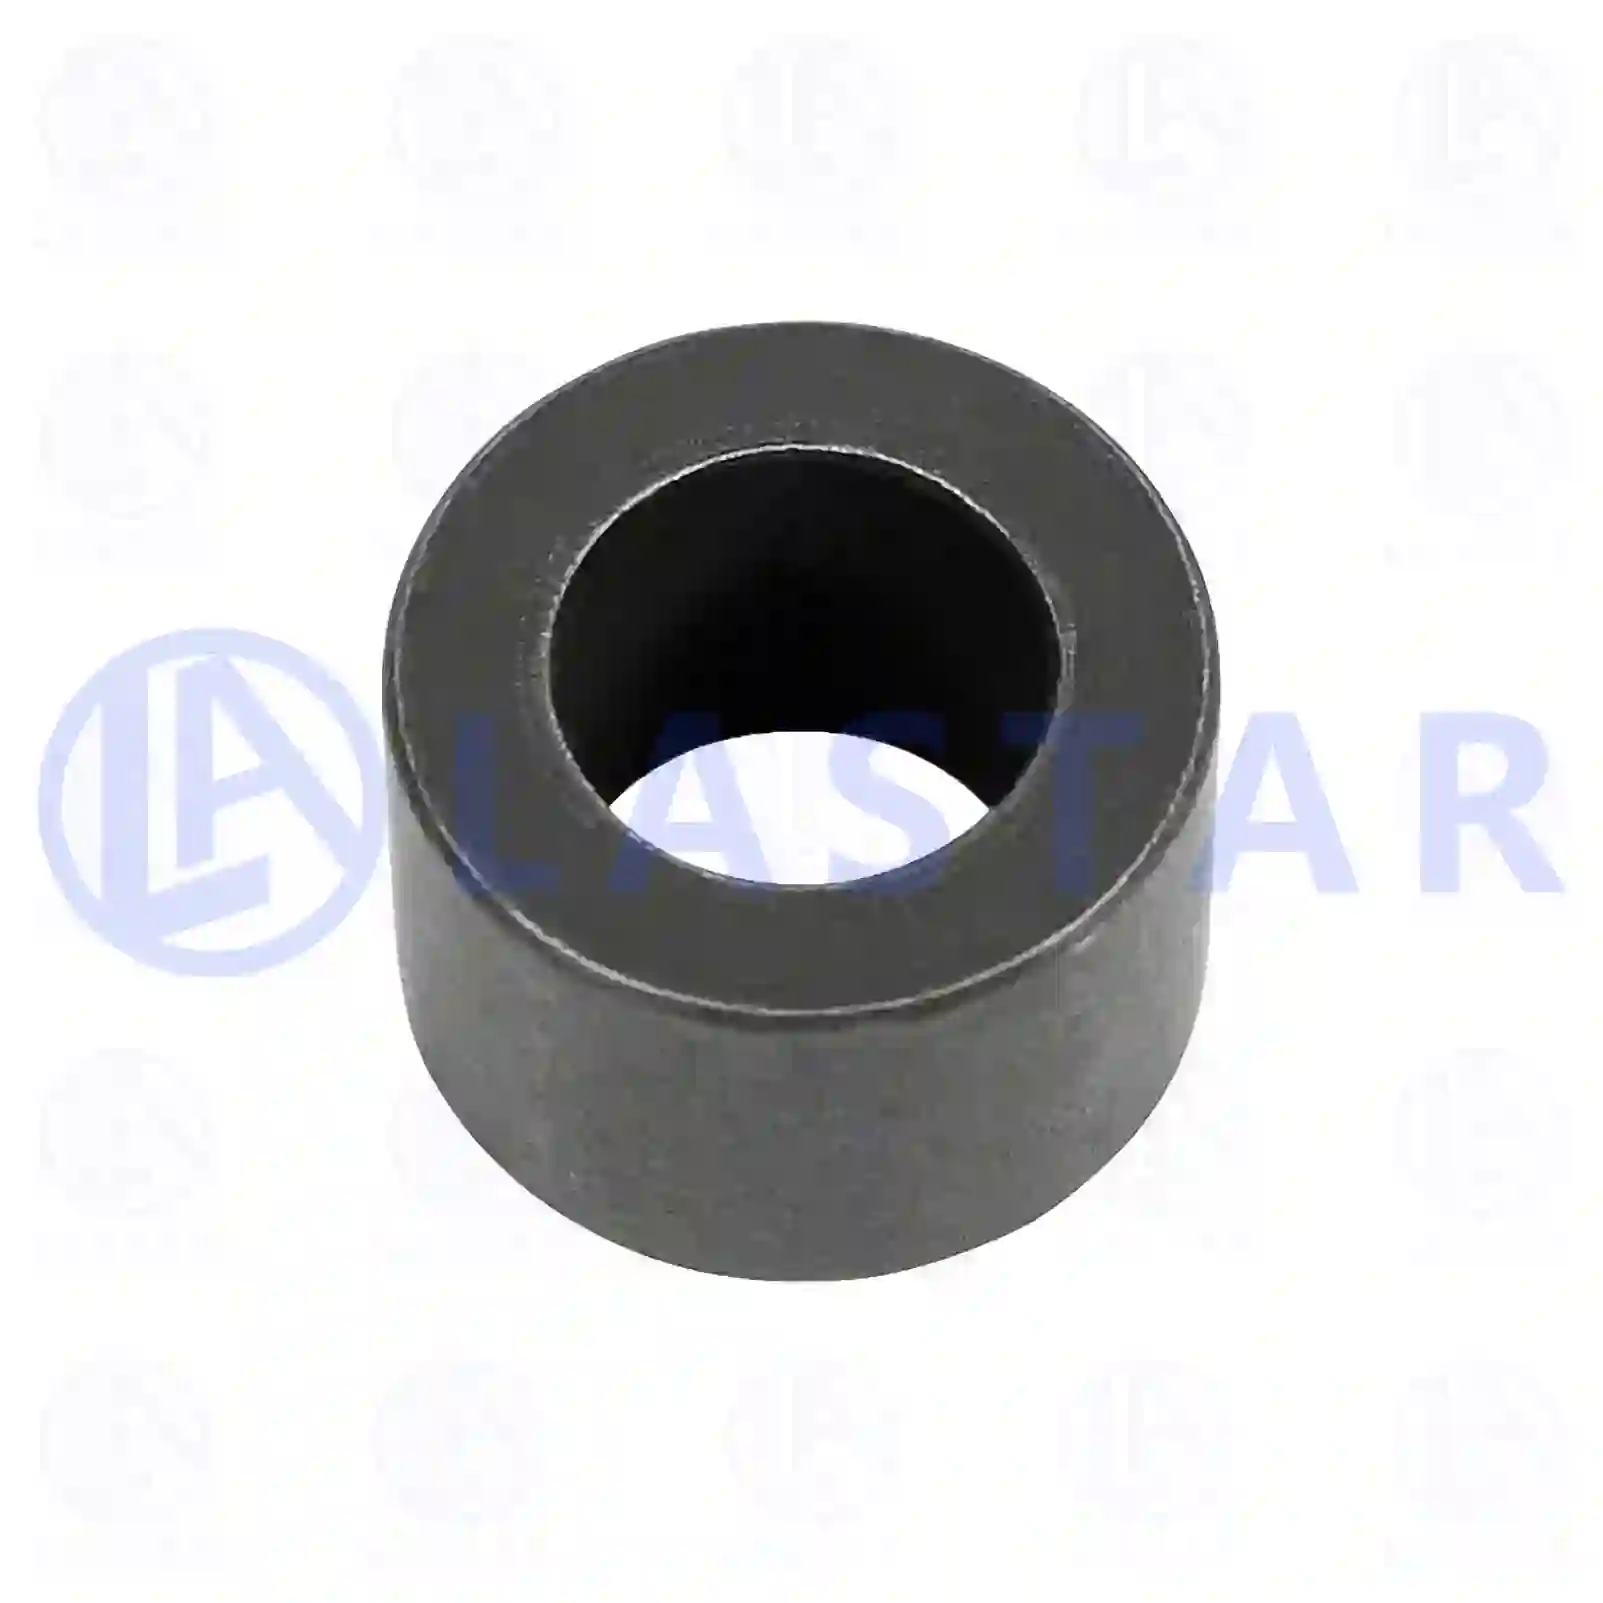 Sleeve, 77701740, 3469910040, , ||  77701740 Lastar Spare Part | Truck Spare Parts, Auotomotive Spare Parts Sleeve, 77701740, 3469910040, , ||  77701740 Lastar Spare Part | Truck Spare Parts, Auotomotive Spare Parts